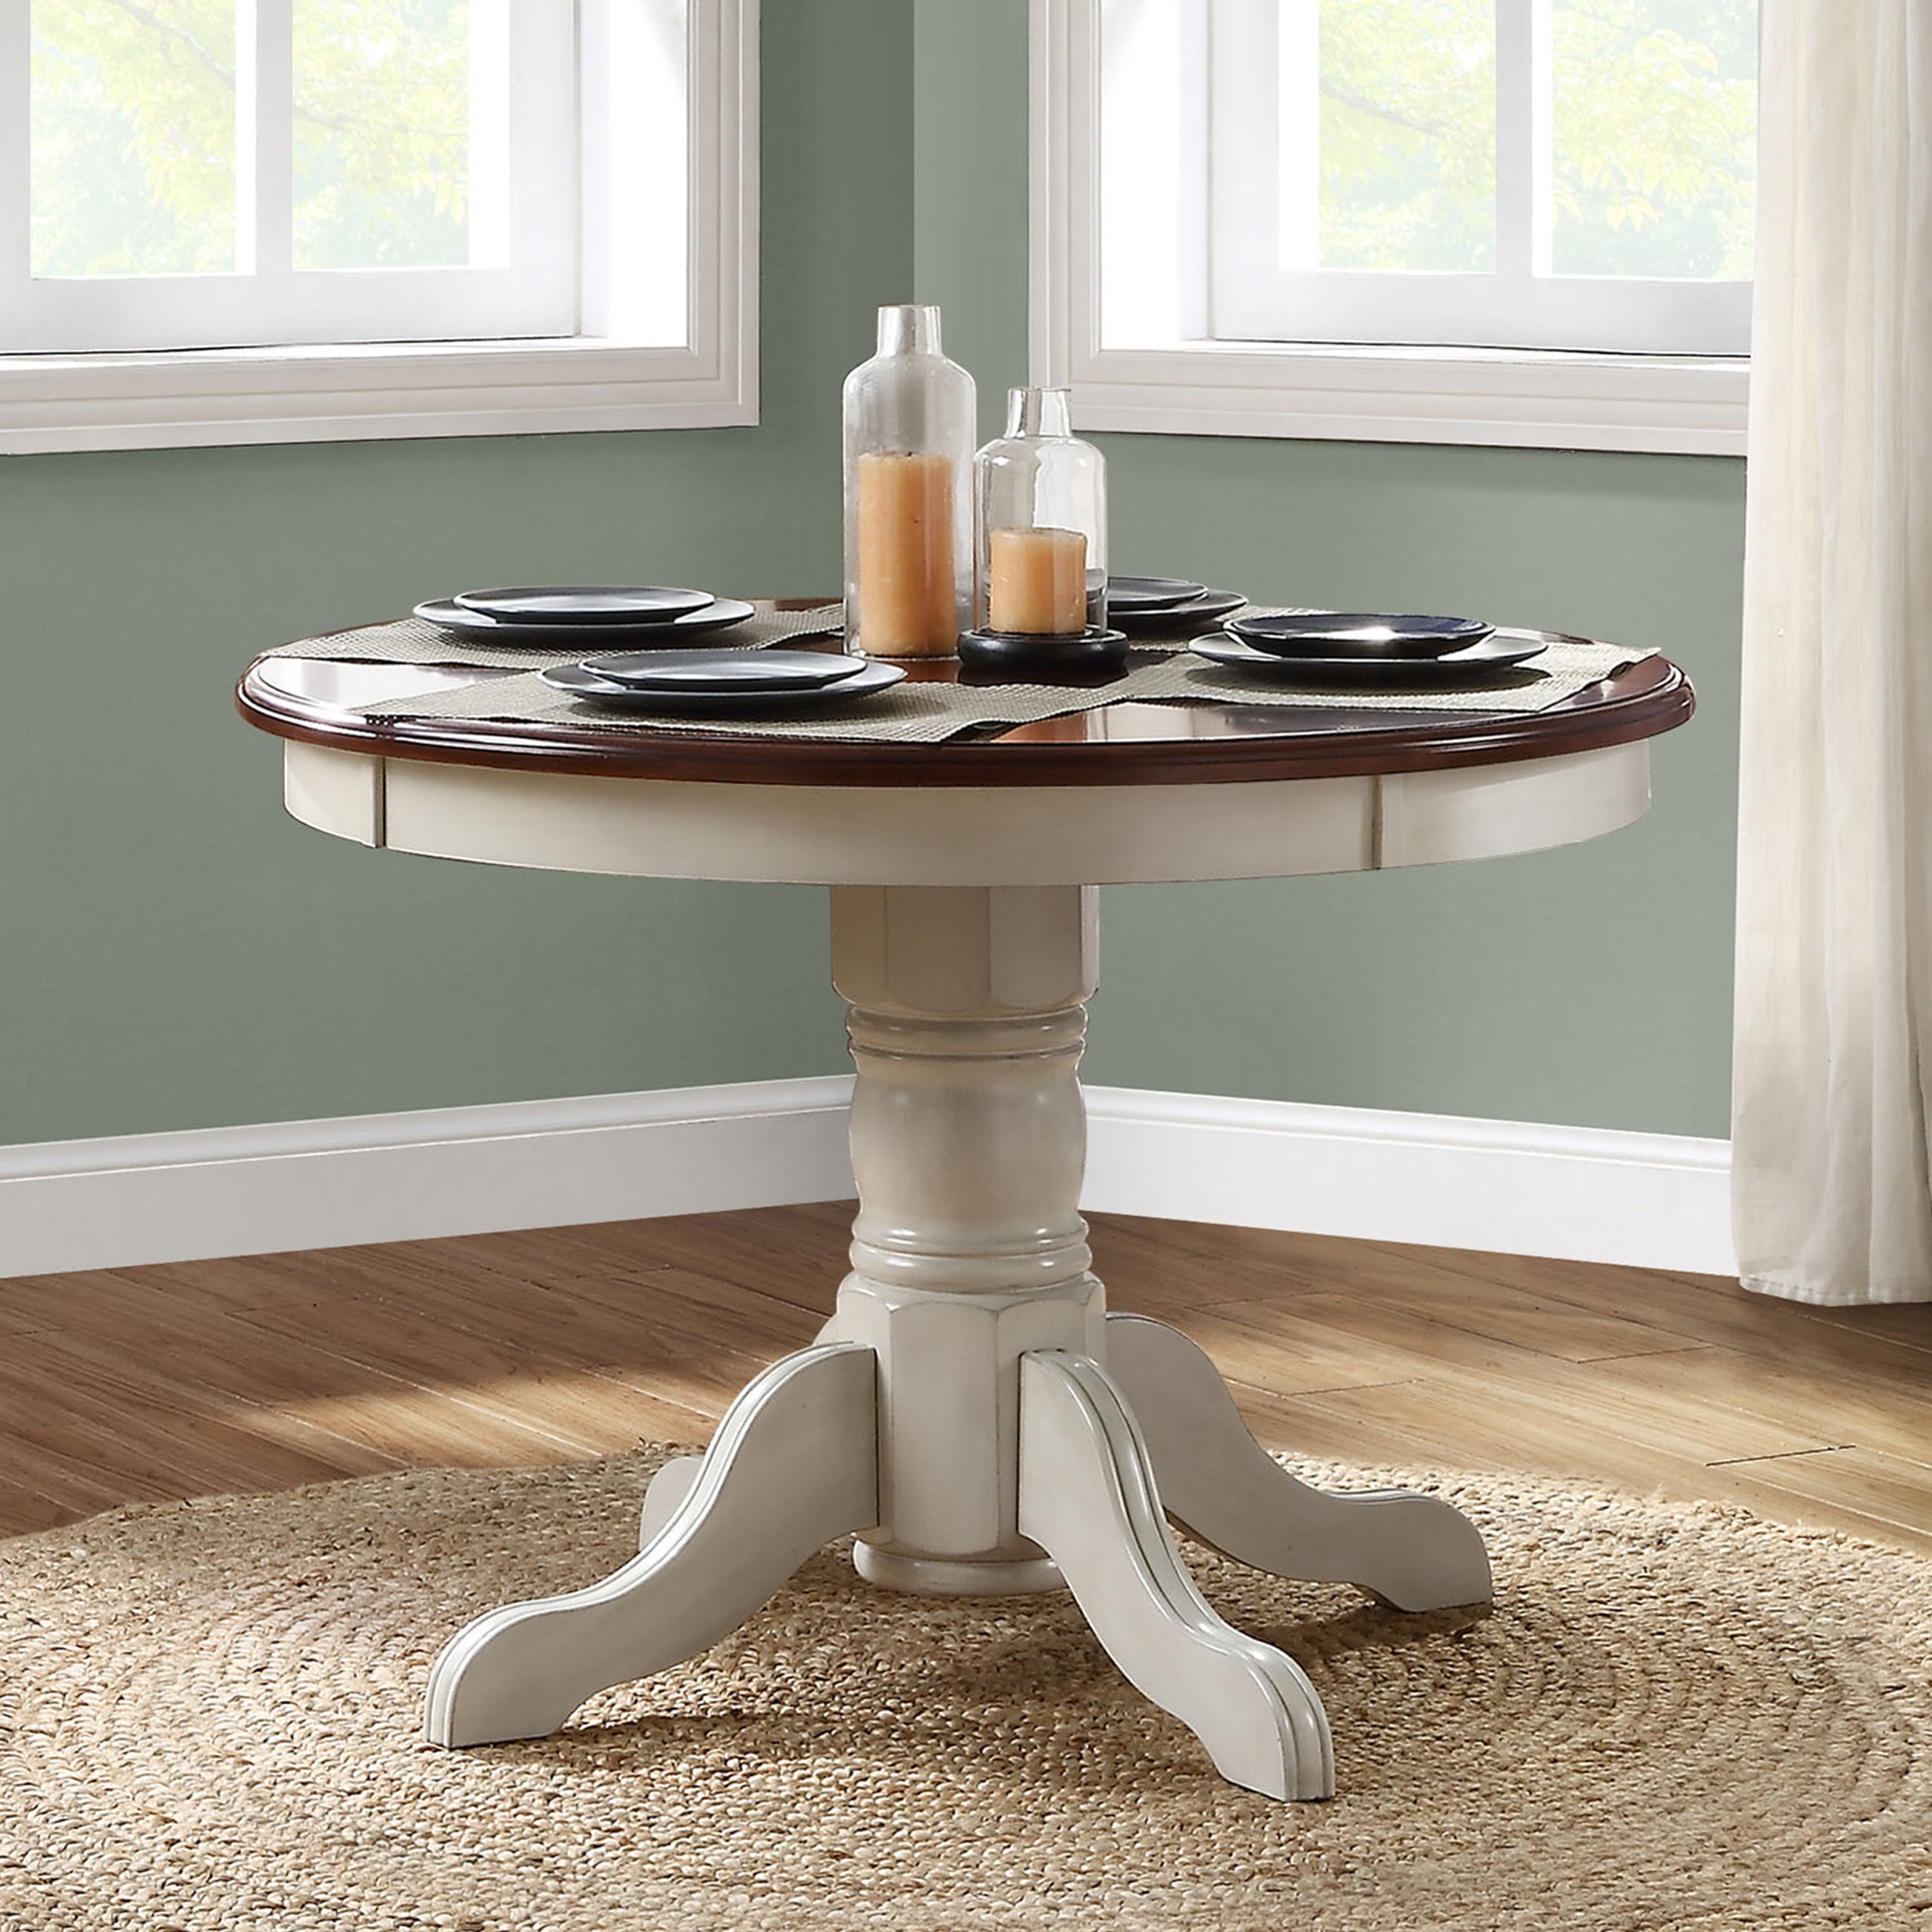 Cambridge Farm House Dining Table Rustic Antique Sage Round Table Mocha Top 